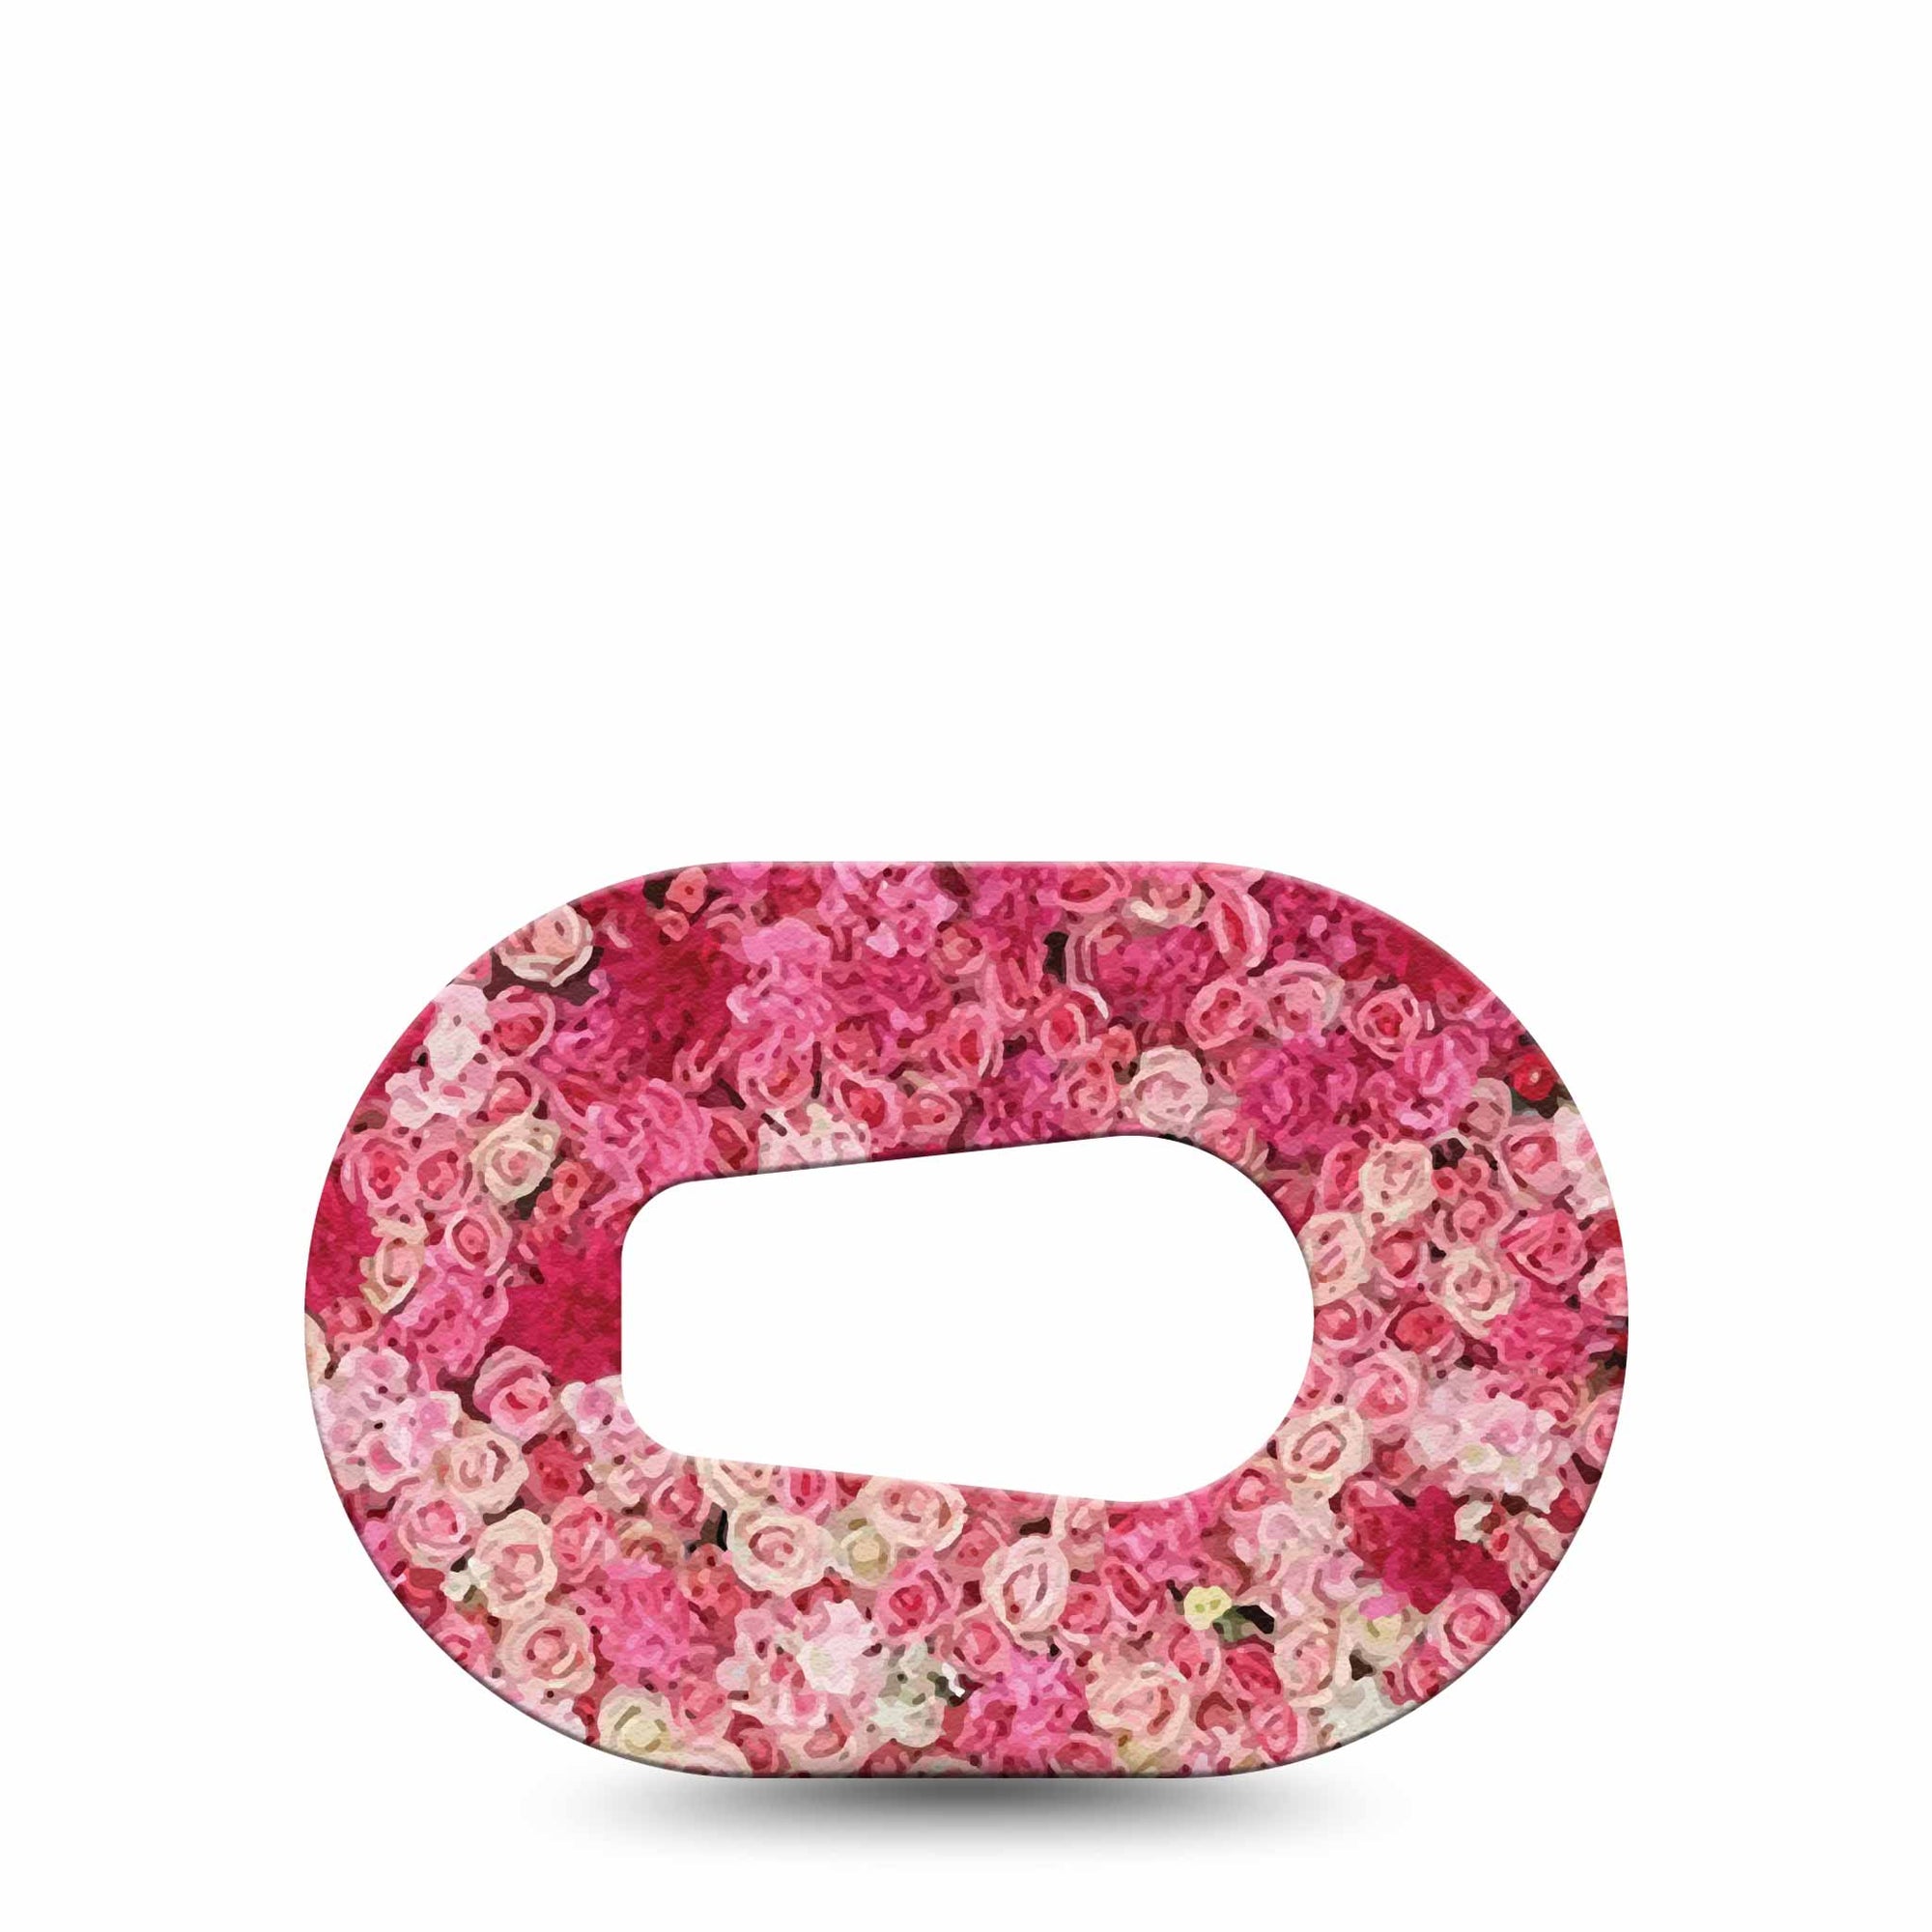 ExpressionMed Flower Wall Mini Tape for Dexcom G6